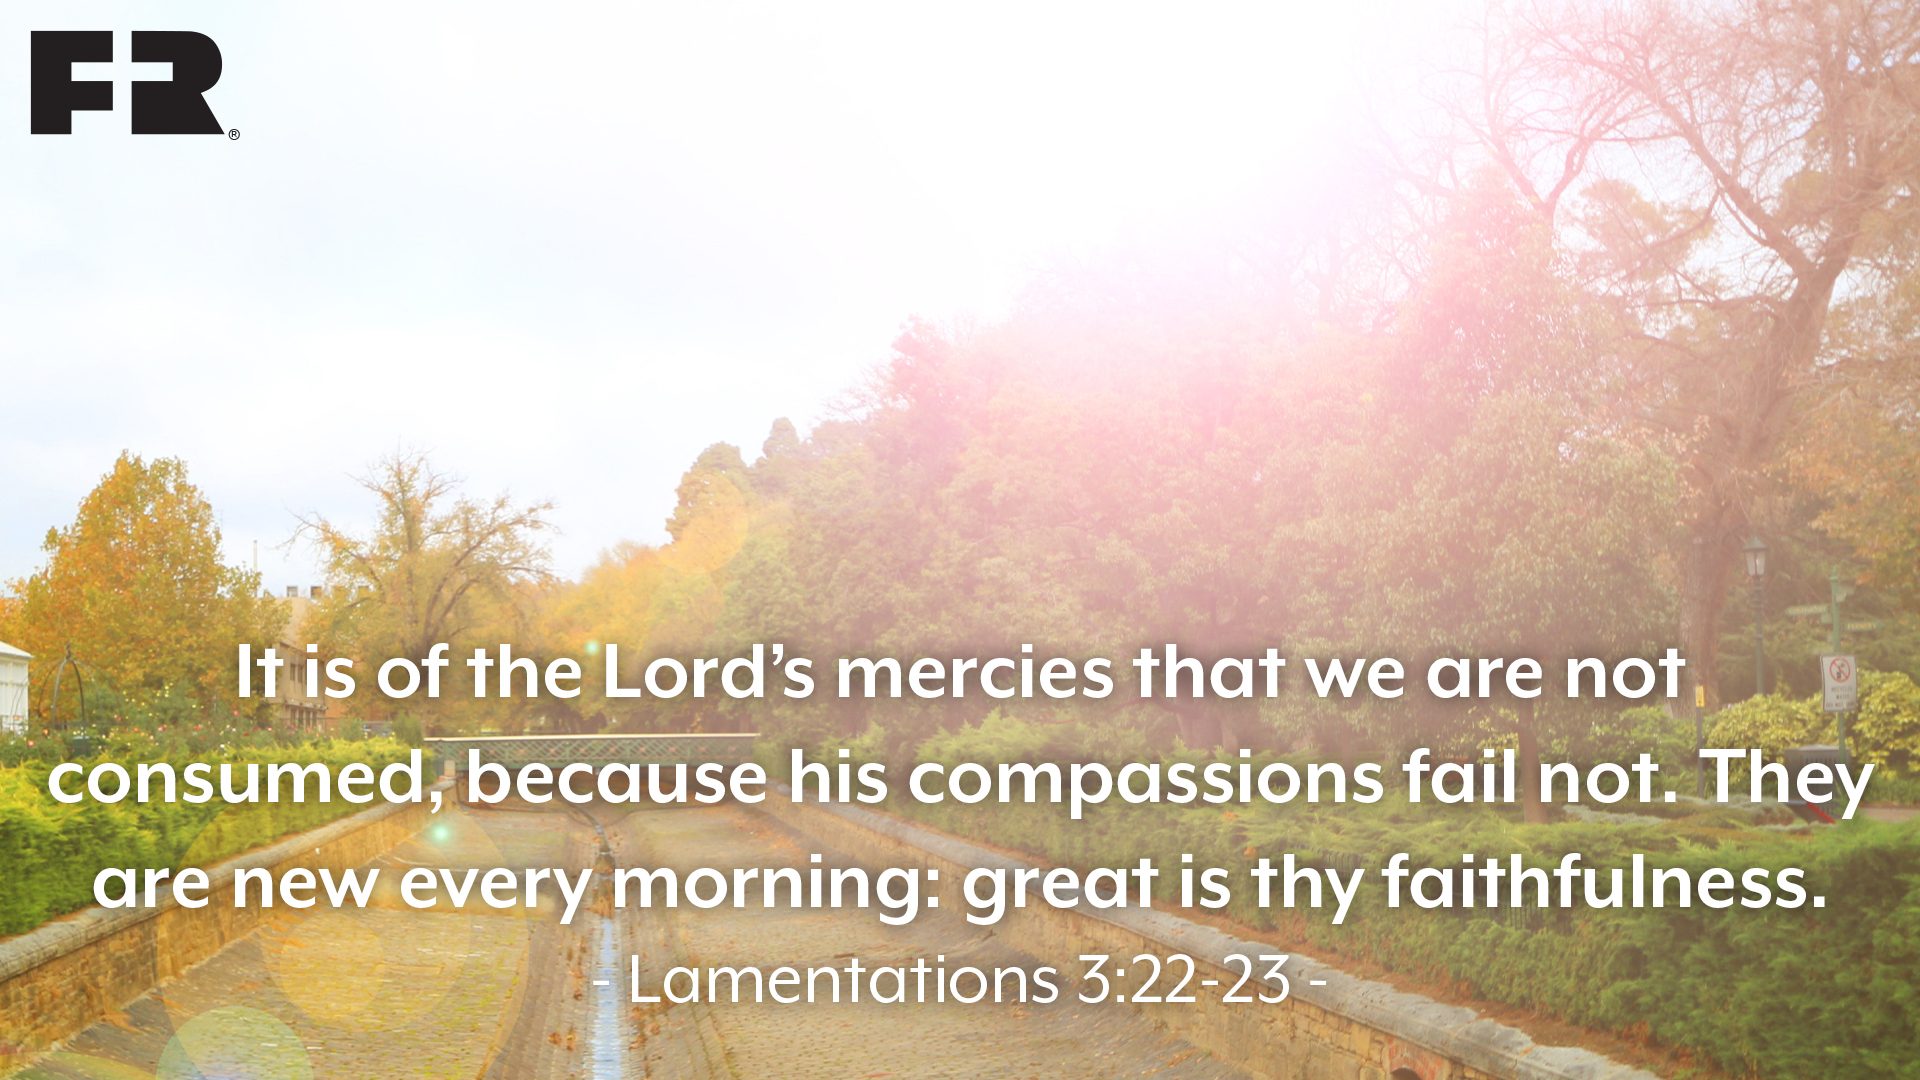 “It is of the LORD’S mercies that we are not consumed, 
because his compassions fail not. They are new every morning: great is thy faithfulness.” 
